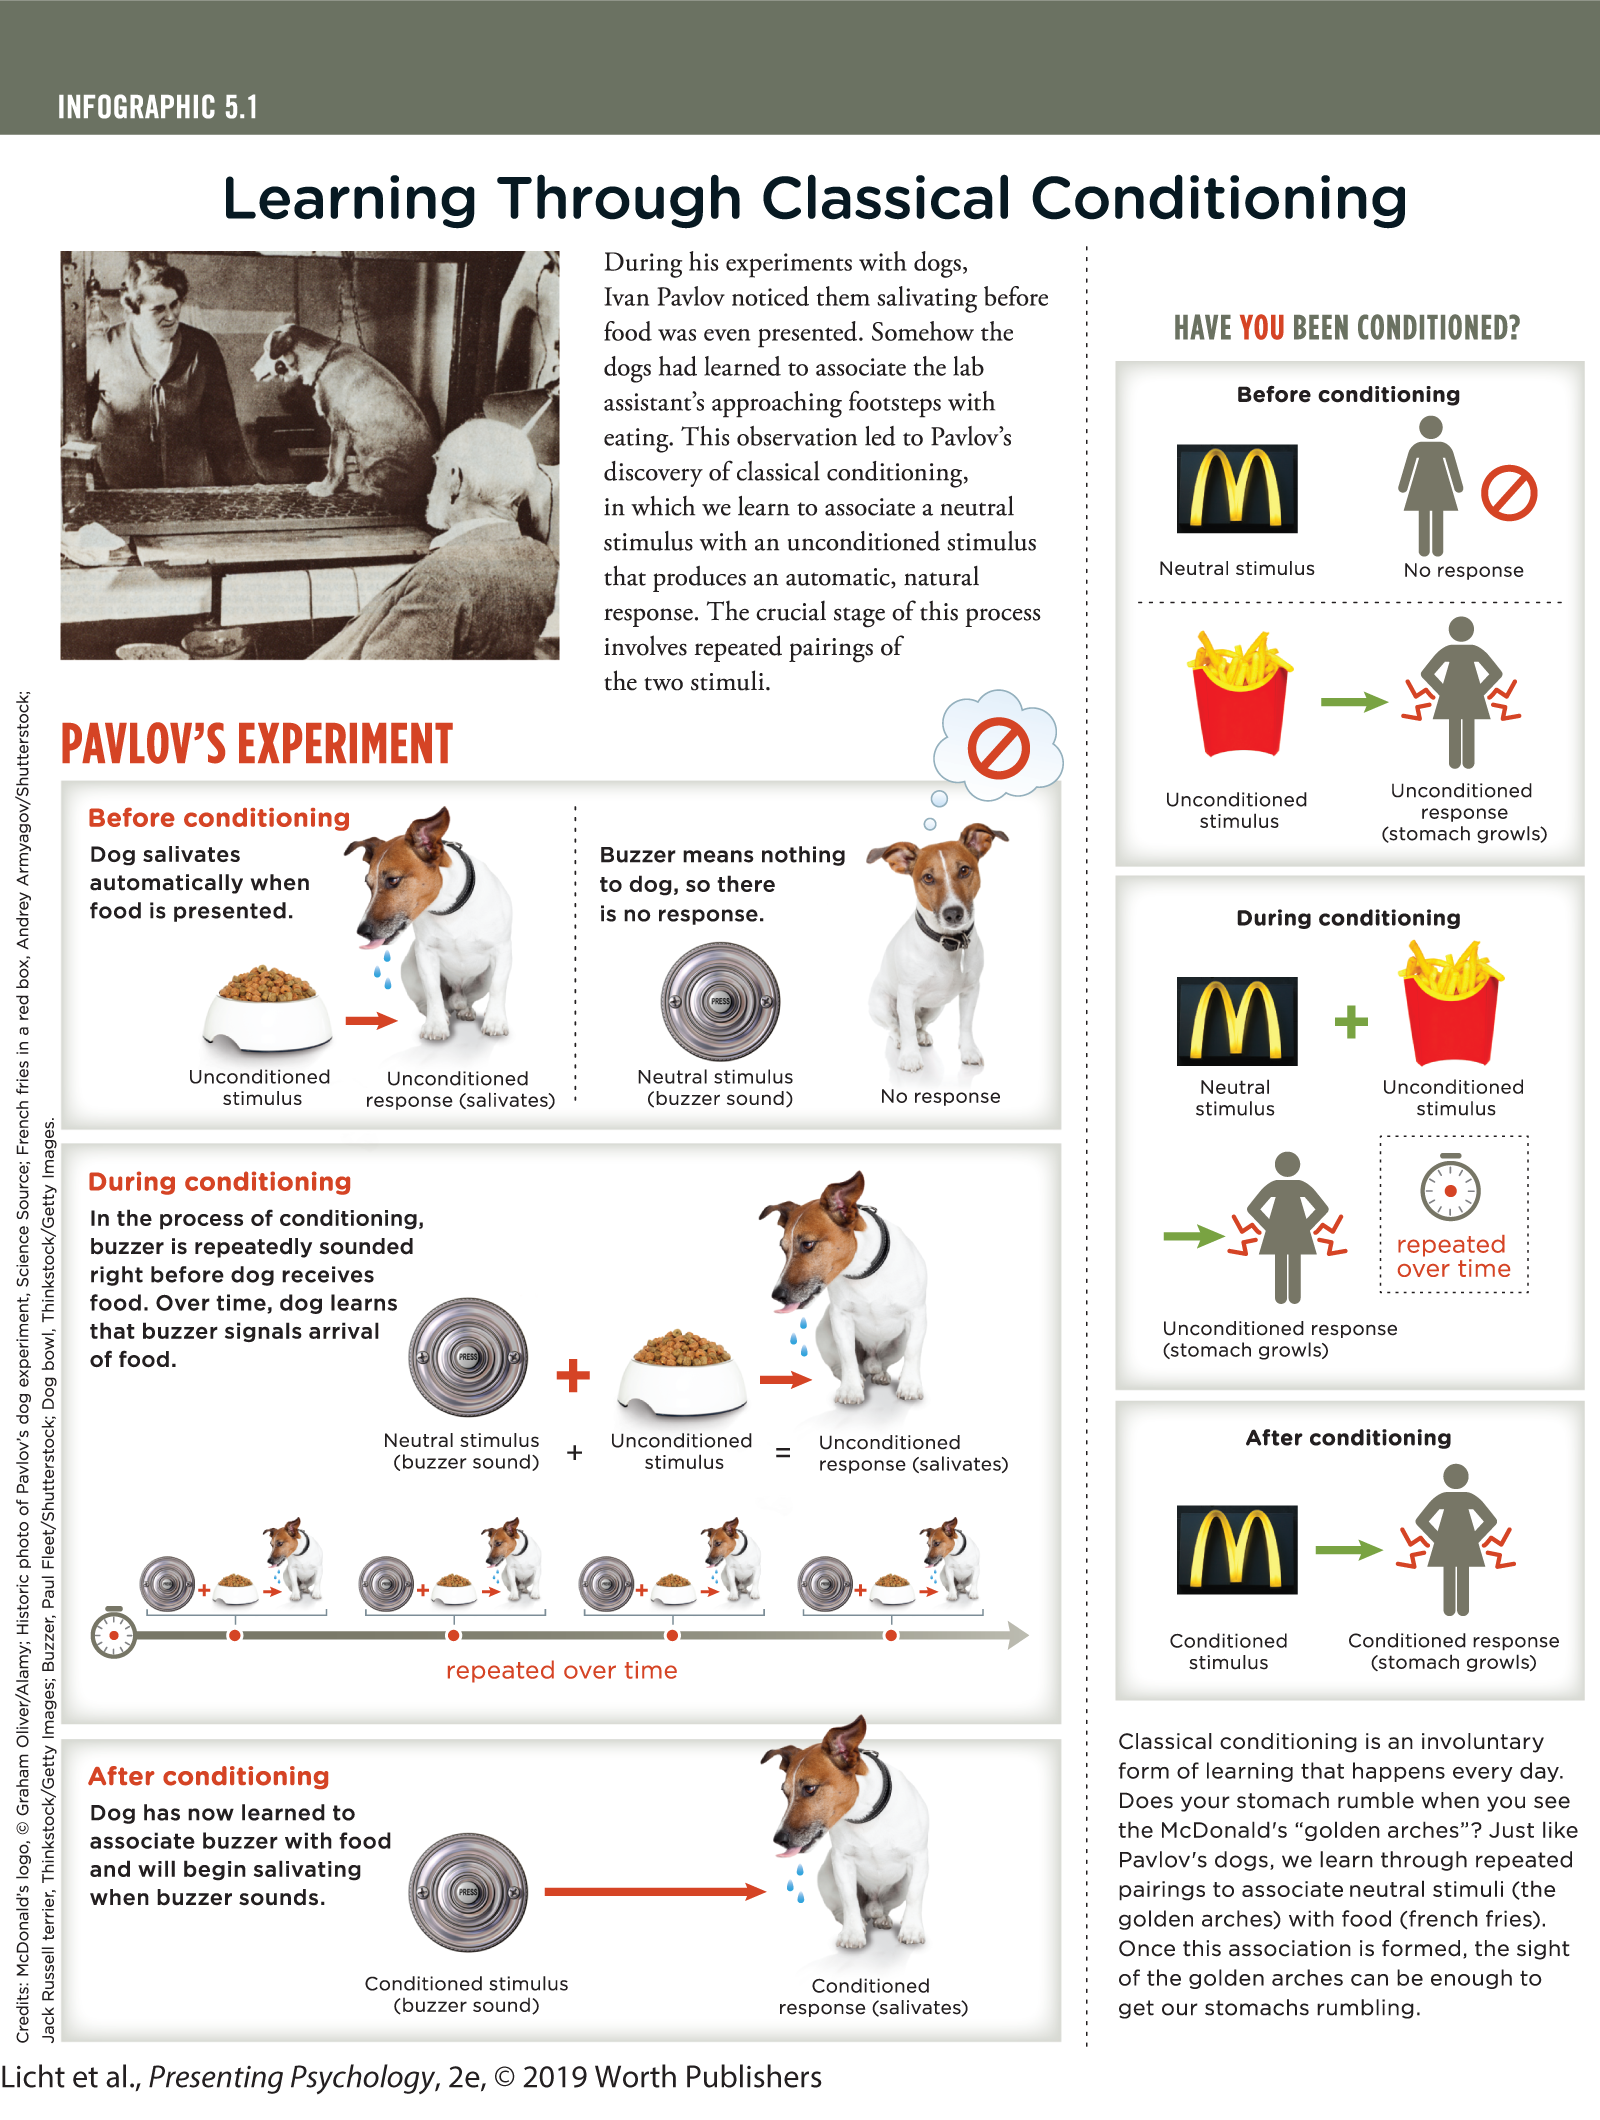 An infographic titled, Learning Through Classical Conditioning explains the Pavlov’s experiment on dogs concerning the effects of different stimuli before, during, and after conditioning. You can read full description from the link below